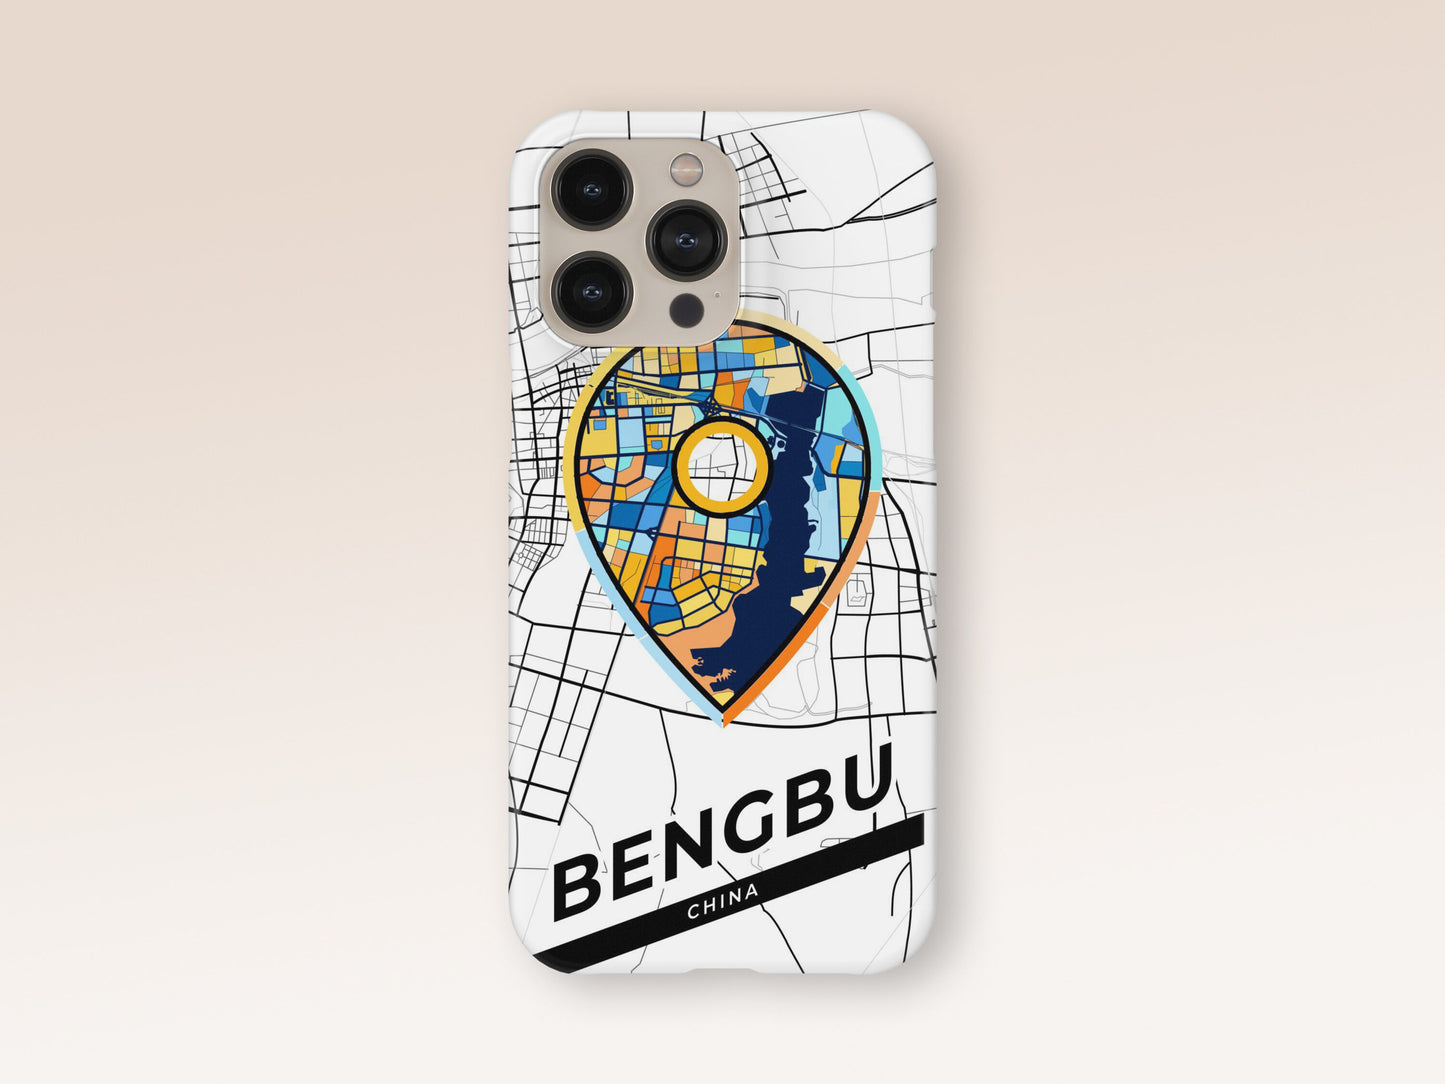 Bengbu China slim phone case with colorful icon. Birthday, wedding or housewarming gift. Couple match cases. 1